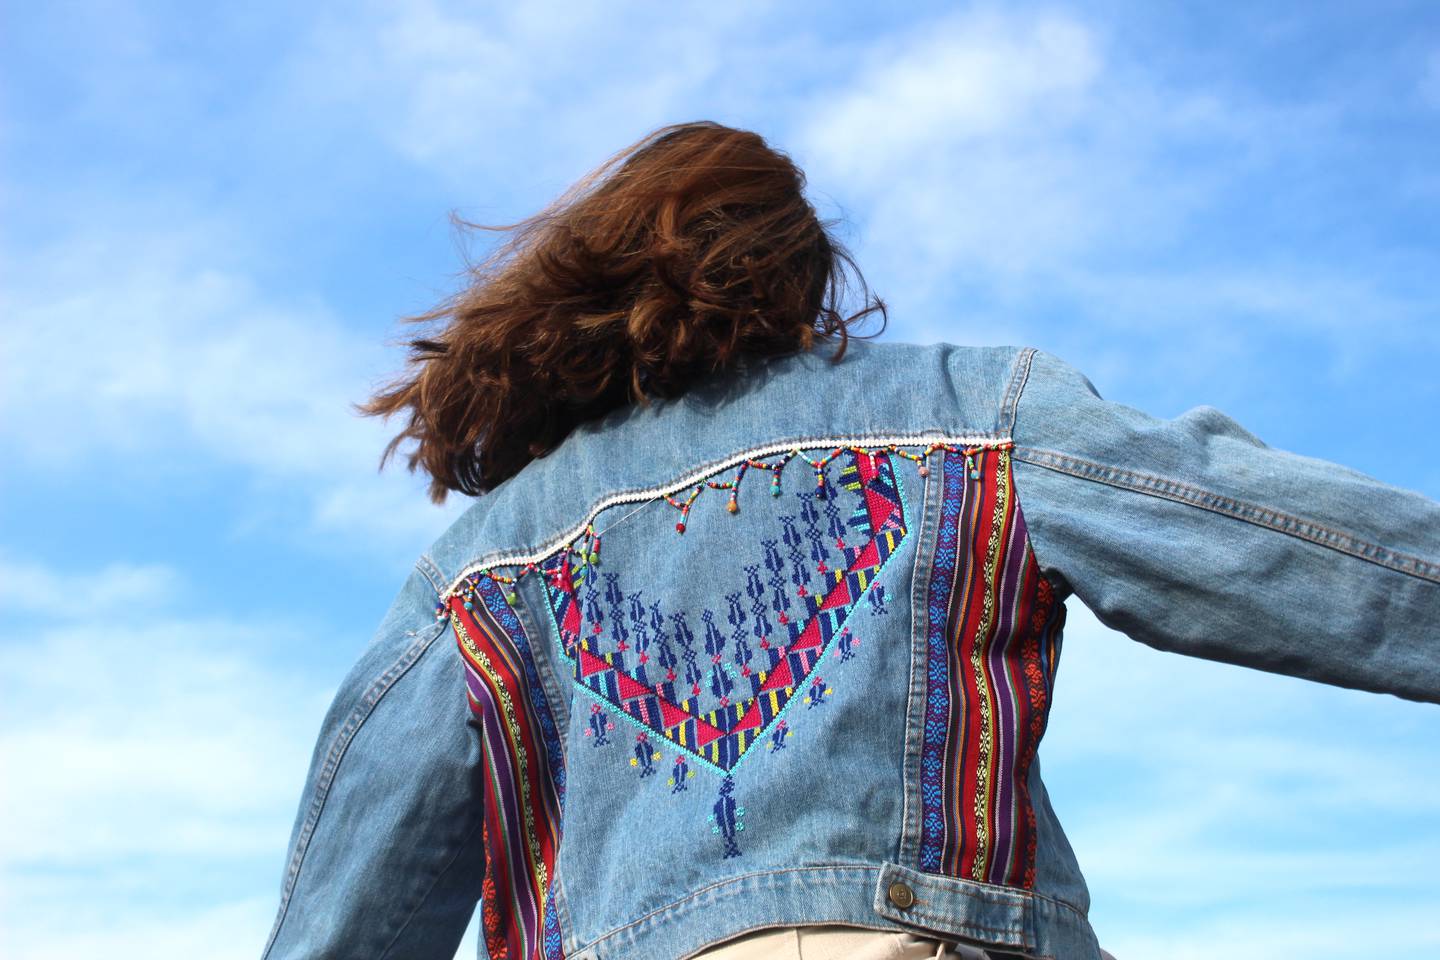 Embroidery aside, the jackets feature beads and coins. Photo: Salma Shawa